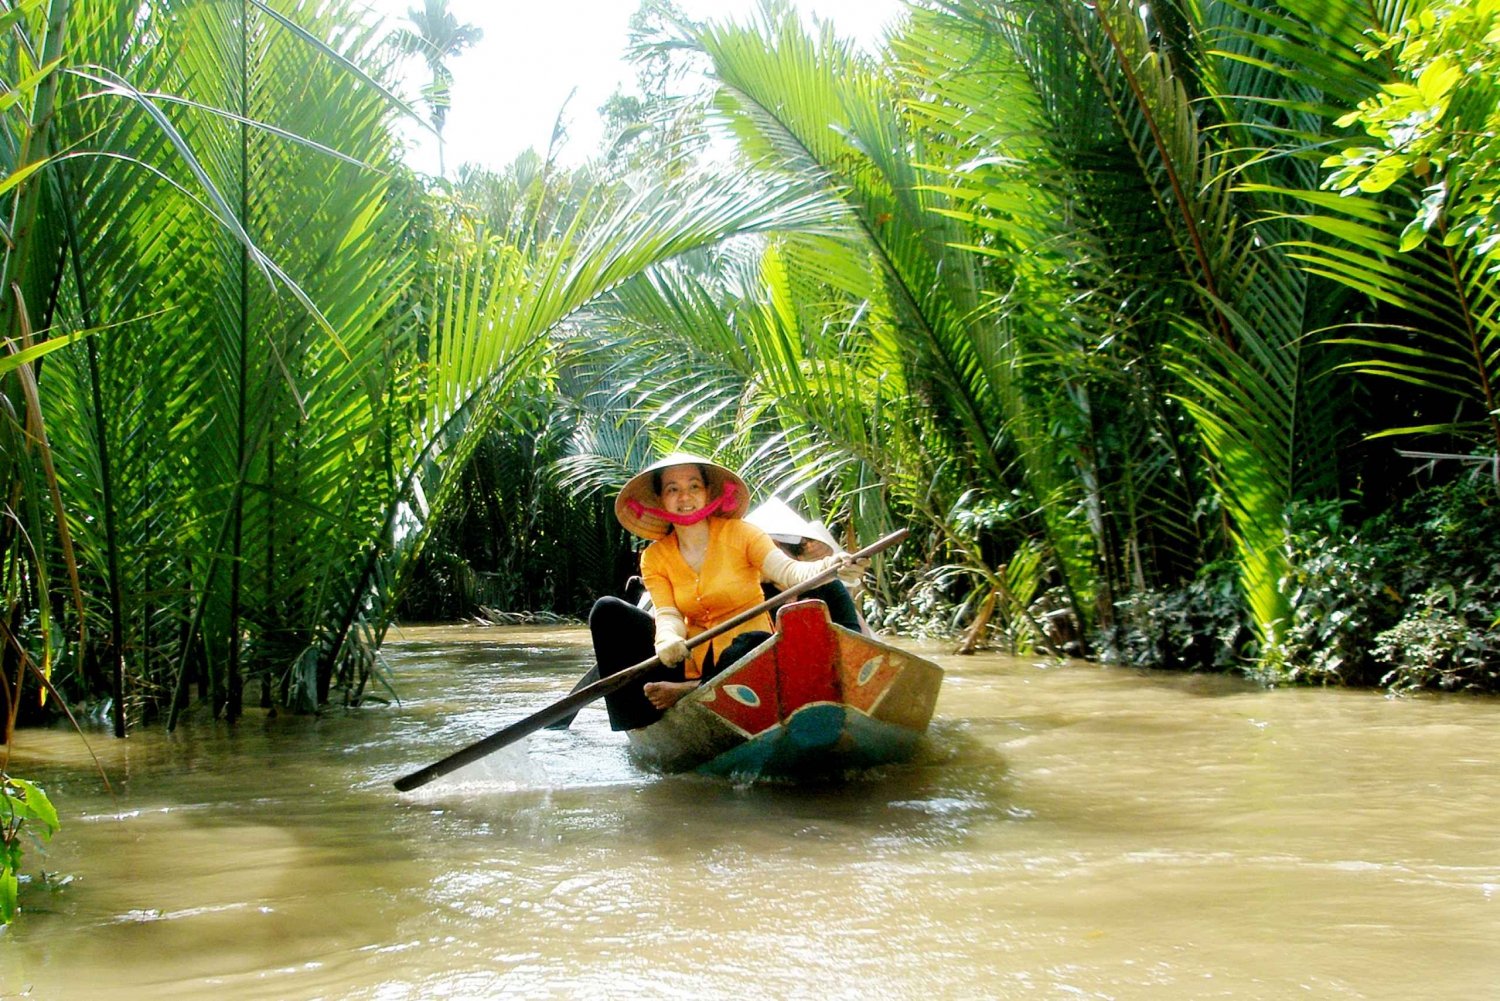 From Ho Chi Minh: Mekong Delta, My Tho & Ben Tre Day Trip